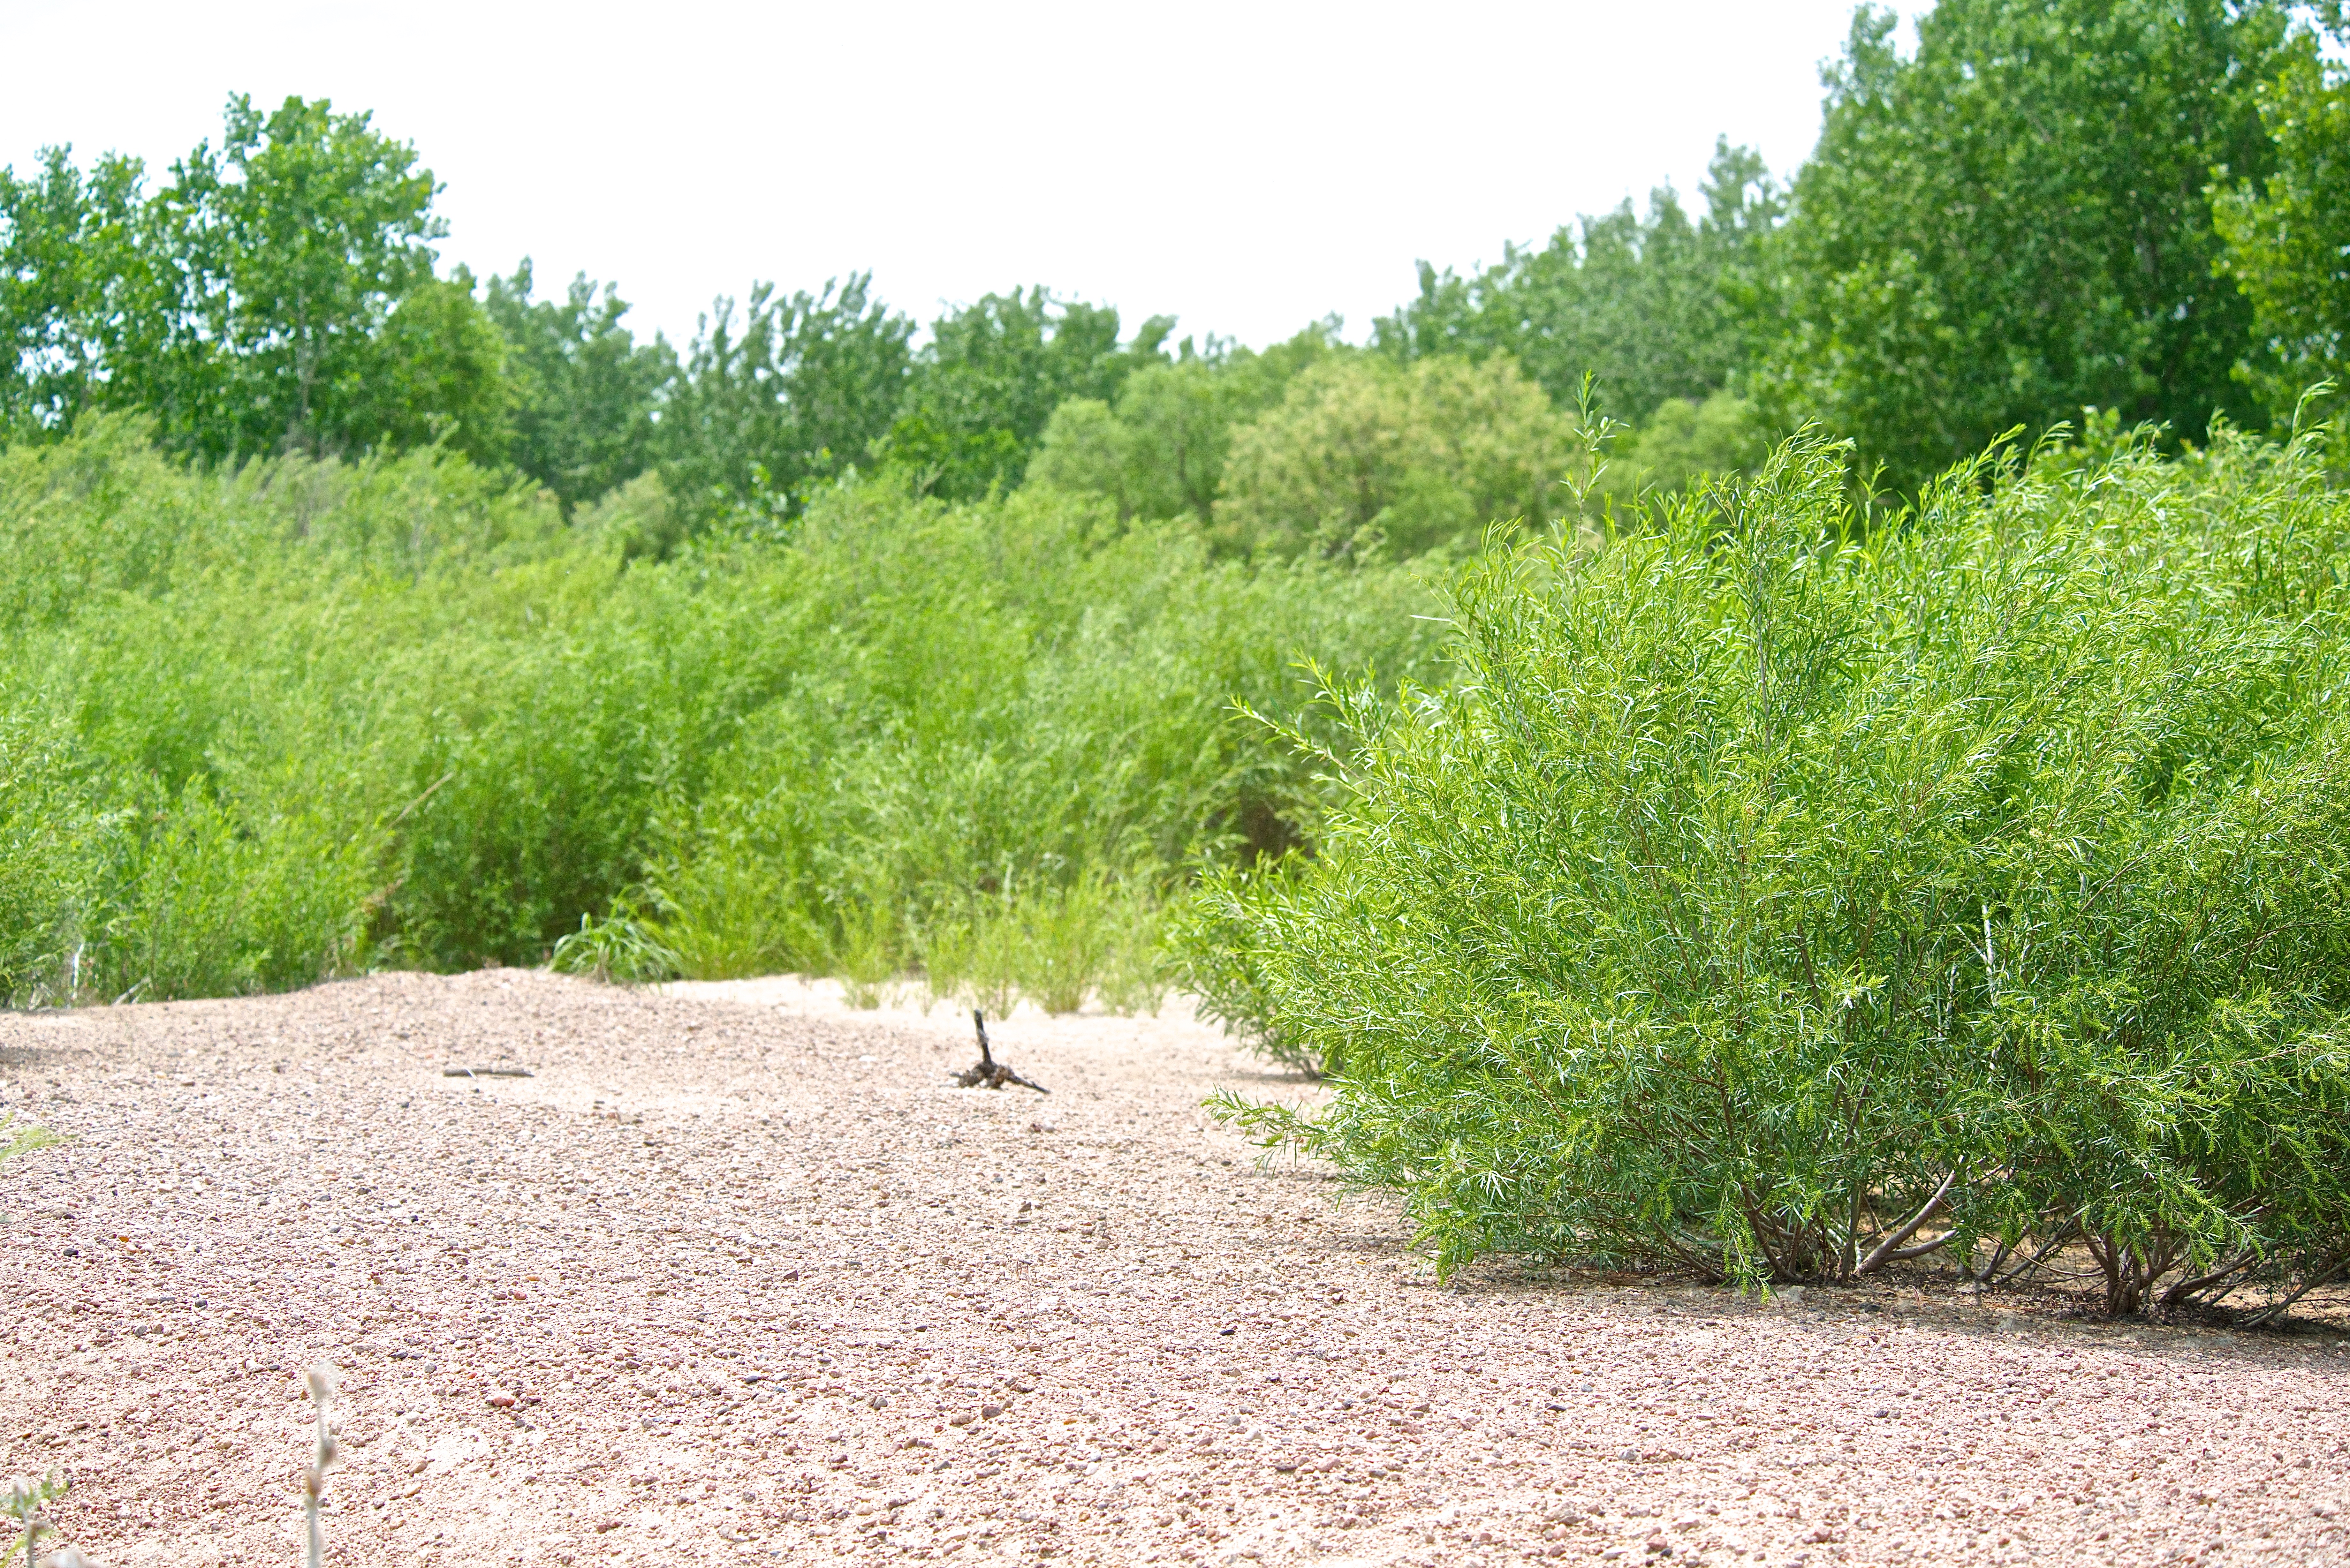 Coyote Willow